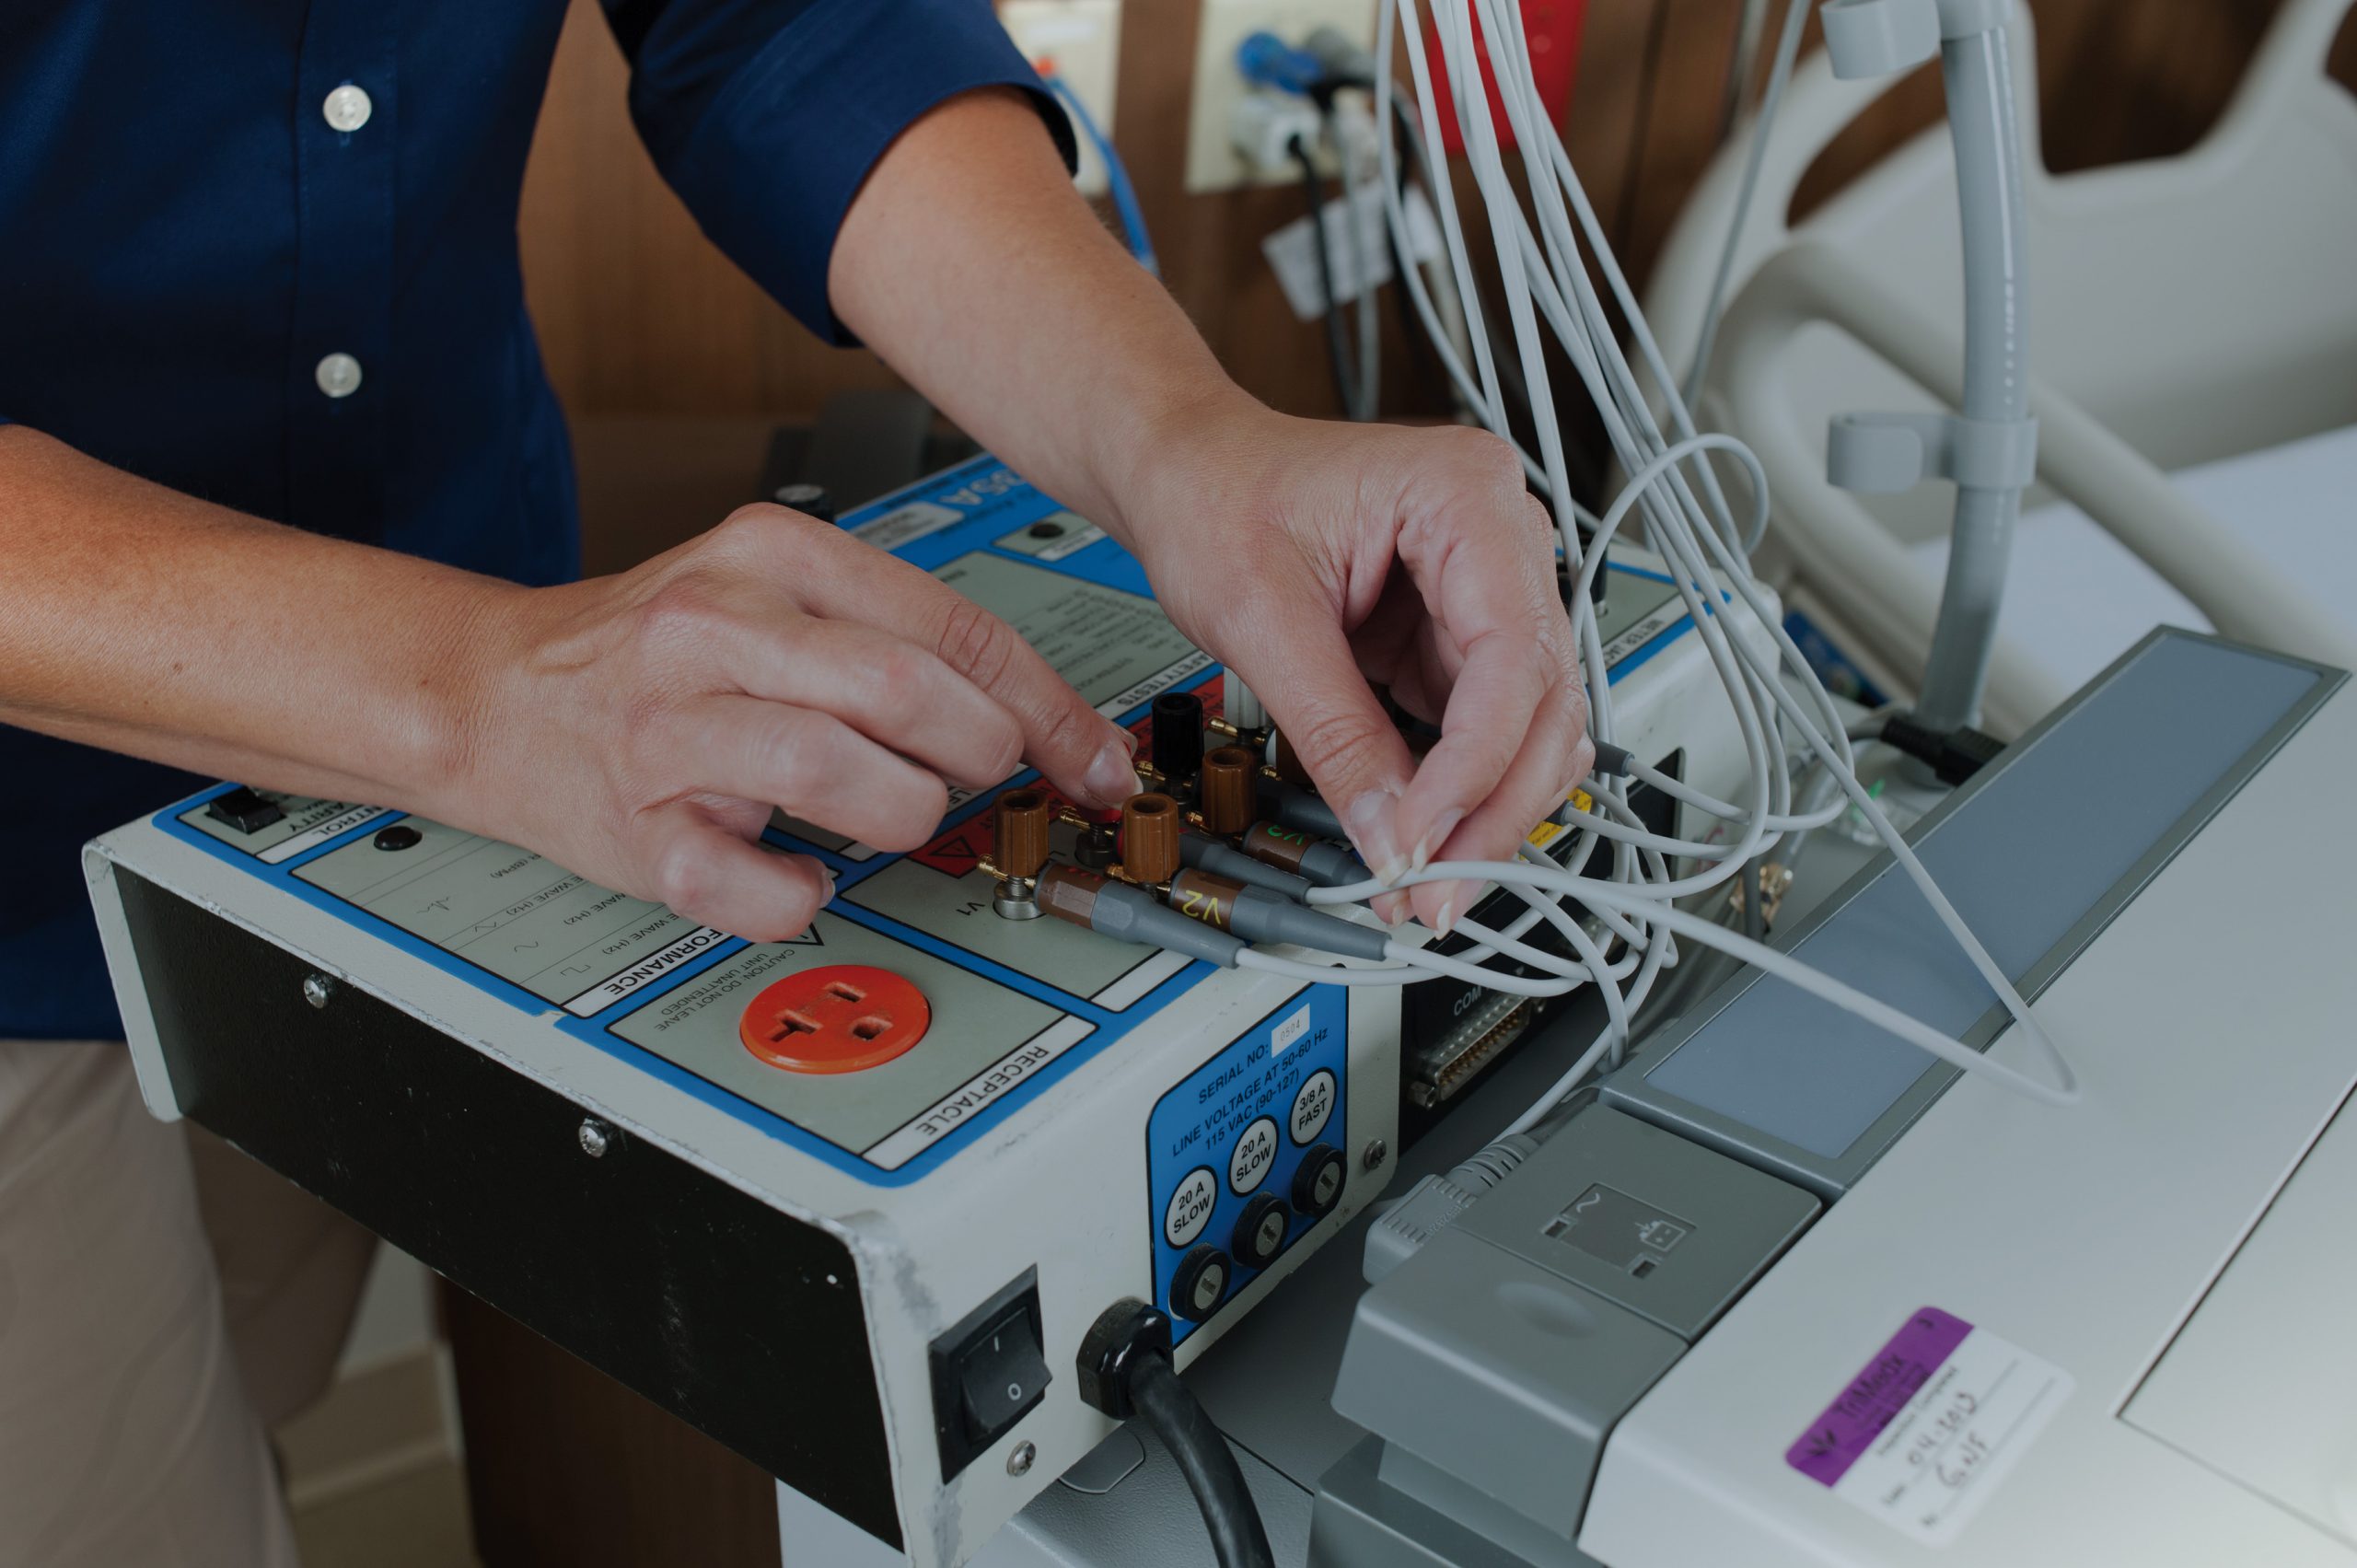 Right to Repair is critical to patient safety and choice